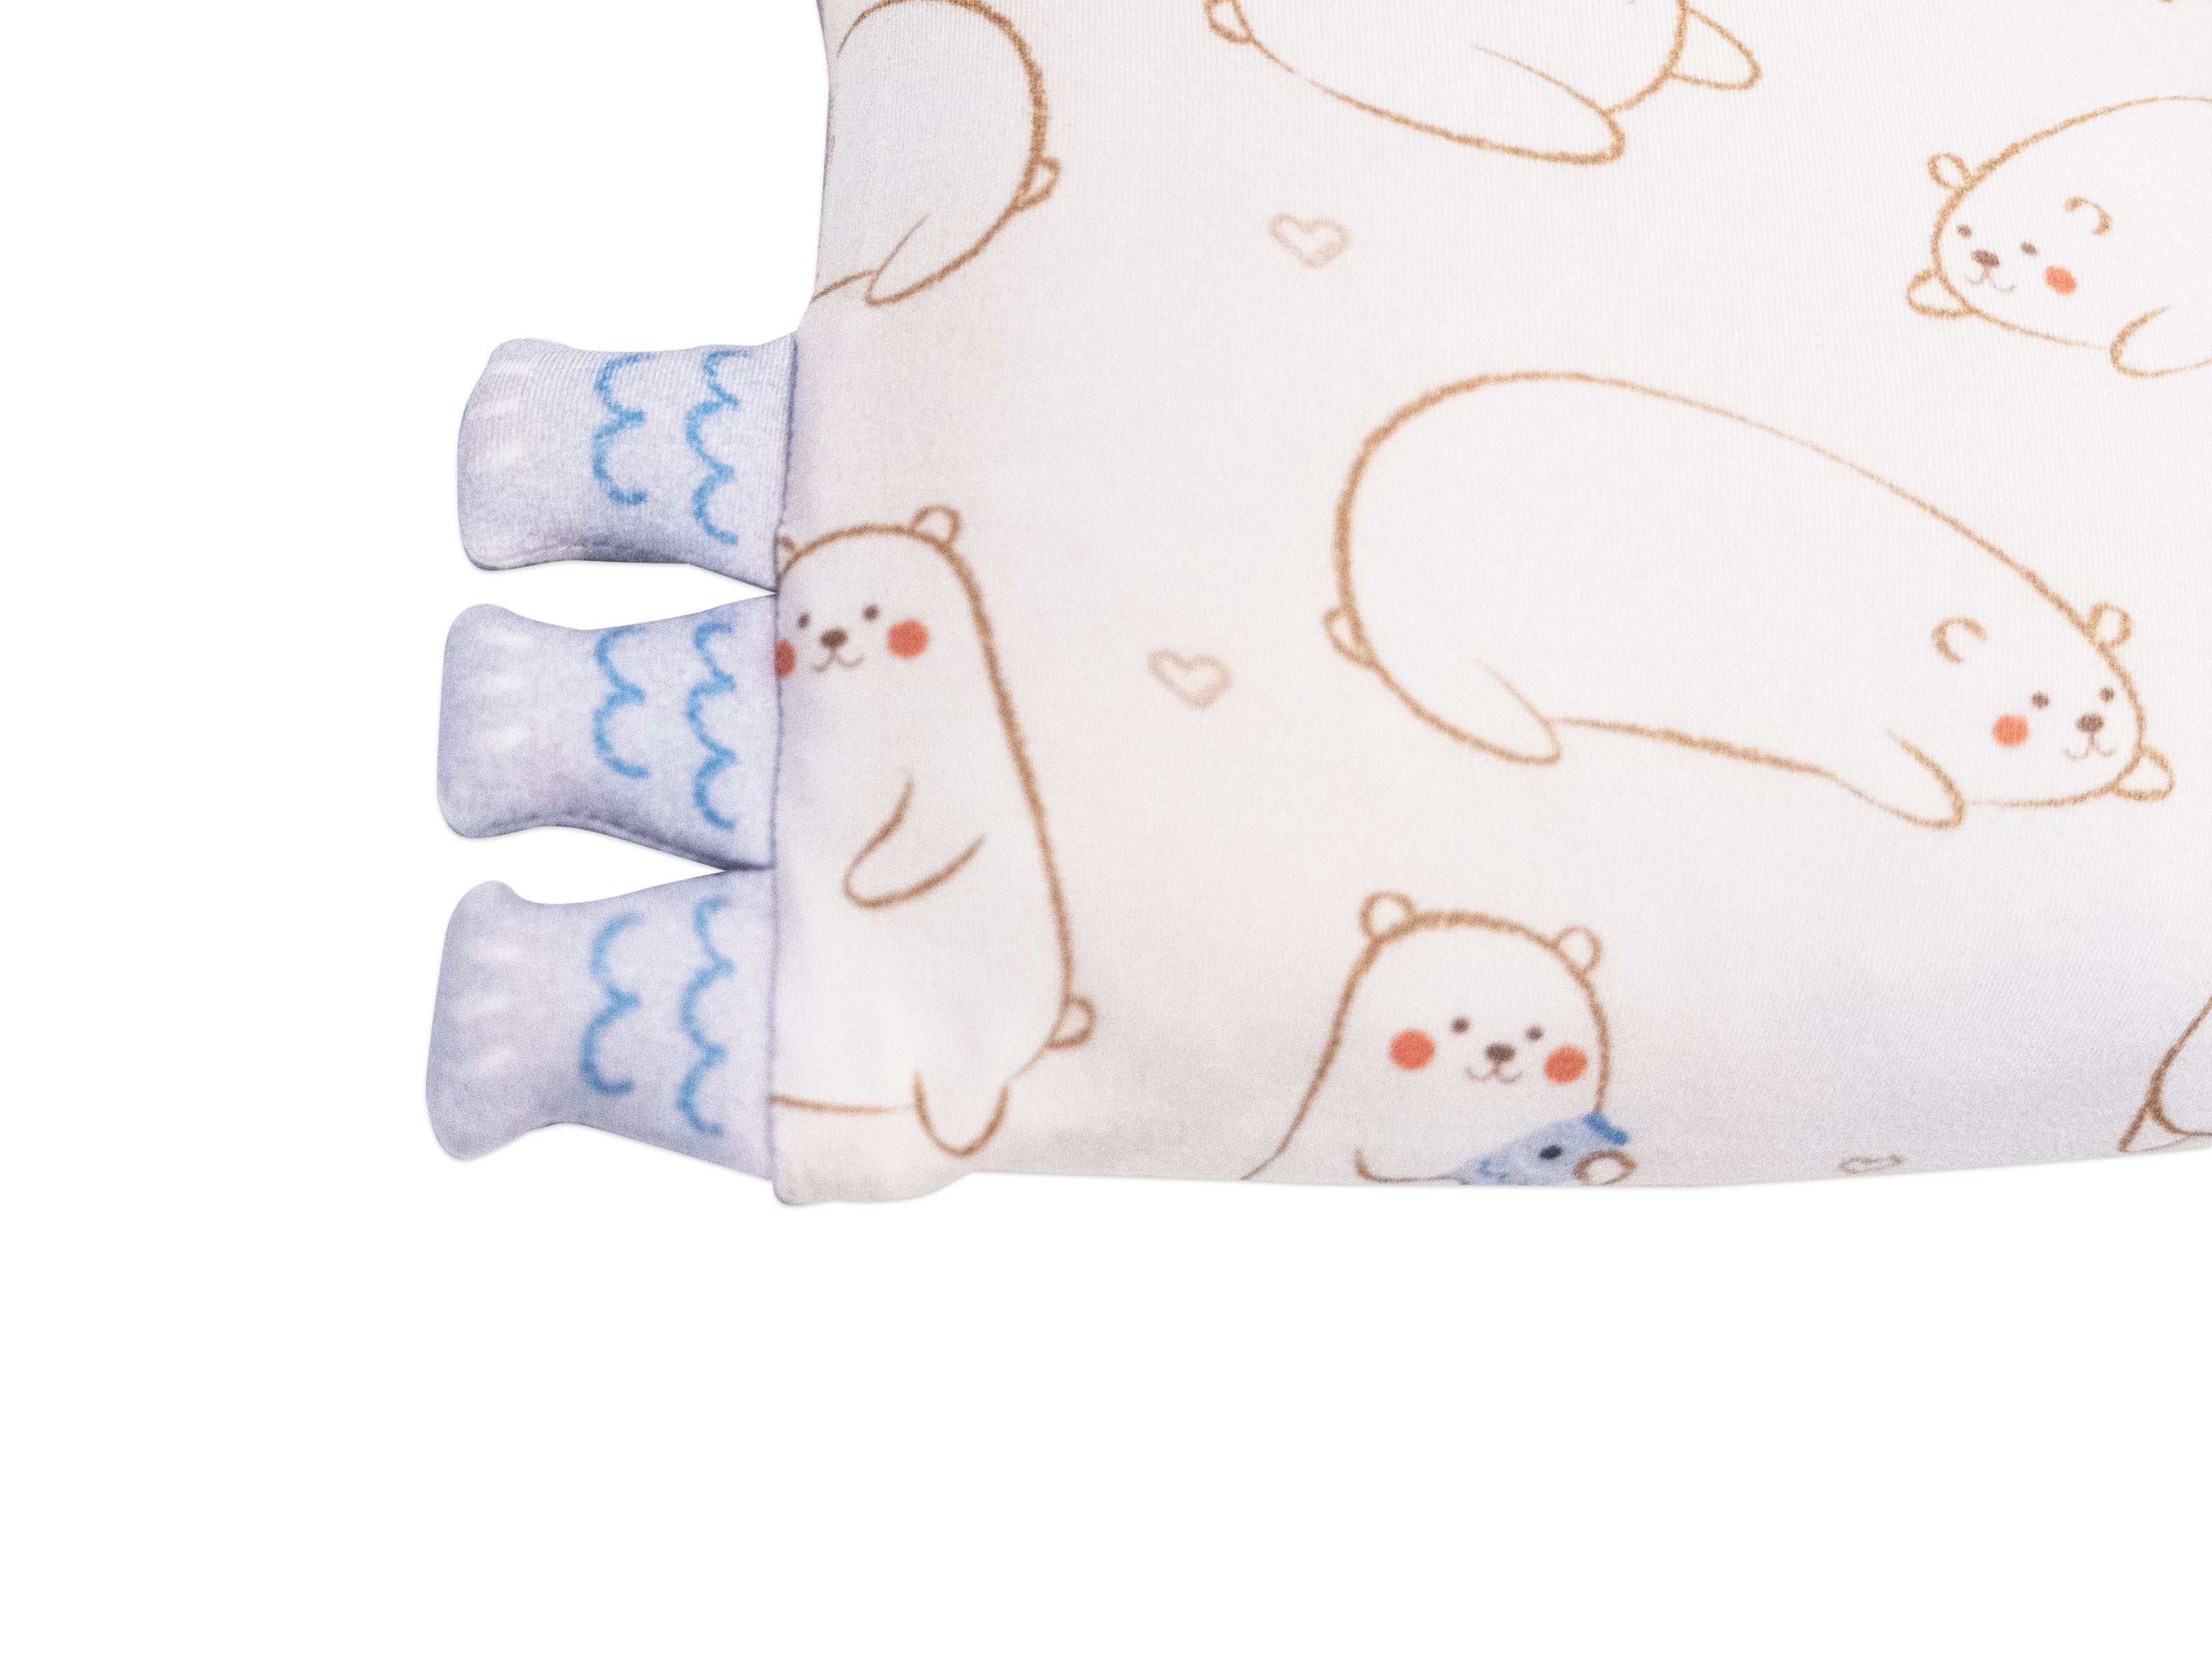 close up on cho pillow fish buntings designed for teething babies